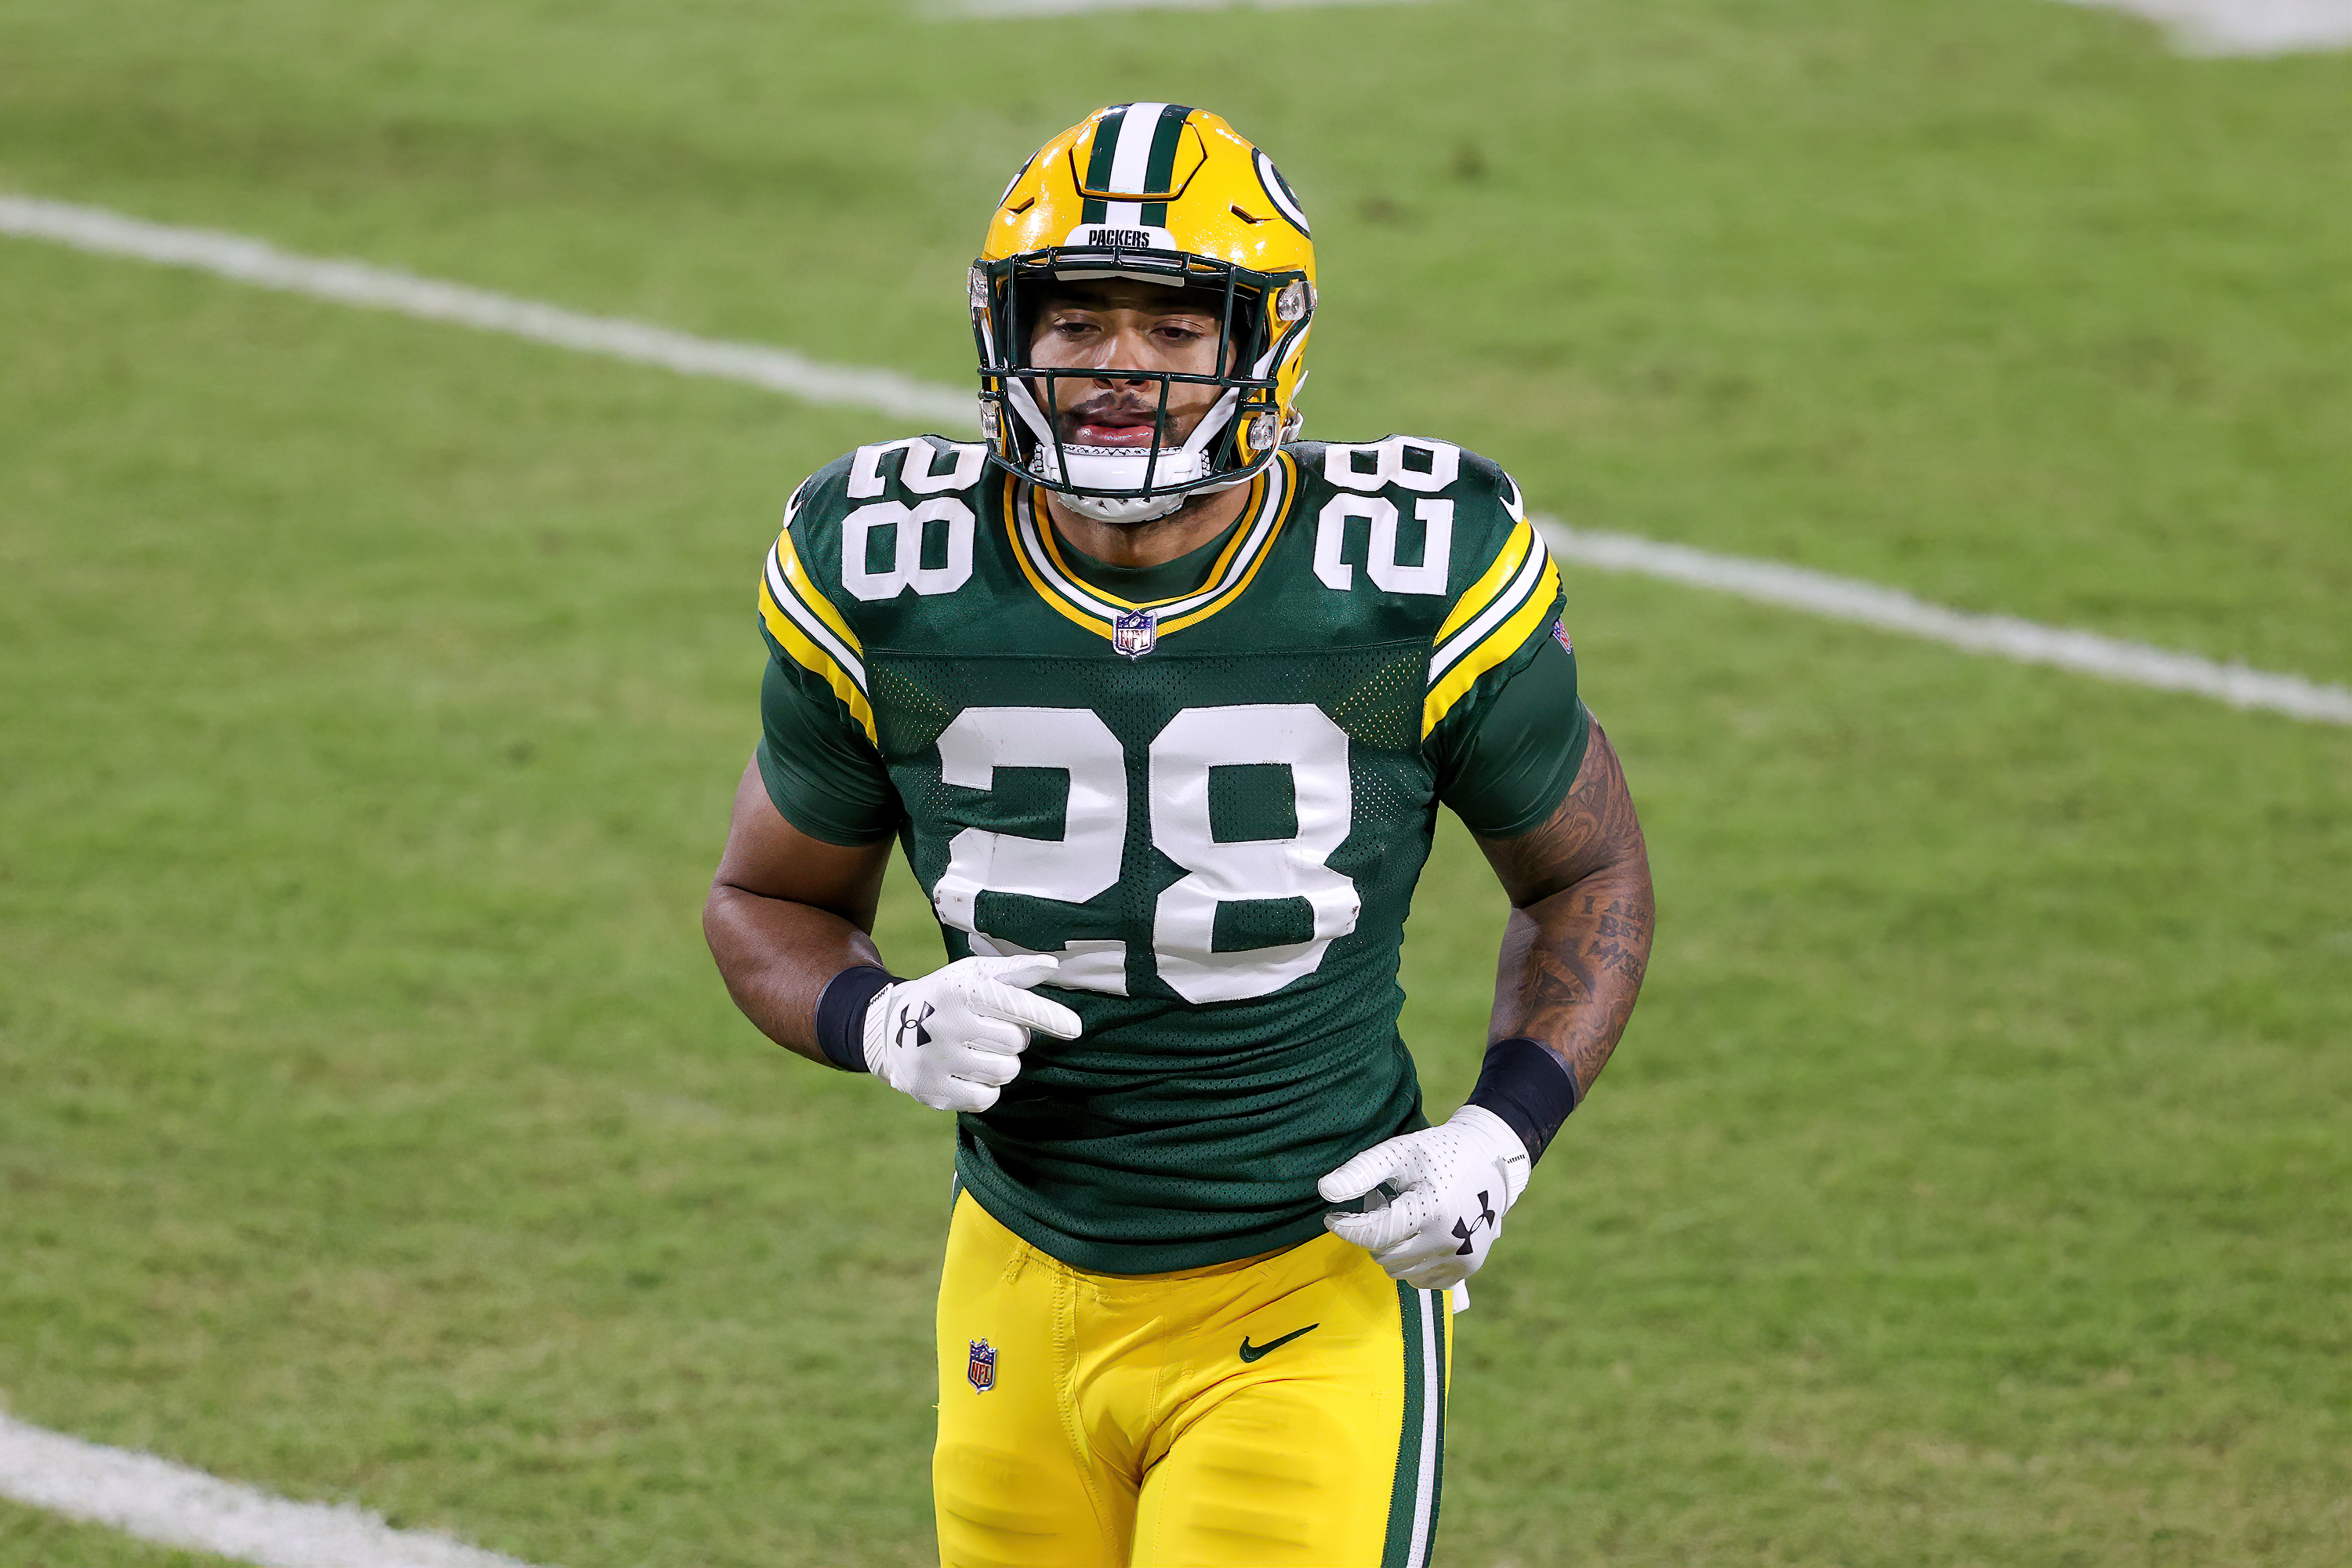 Packers running back AJ Dillon, wife Gabrielle expecting first child